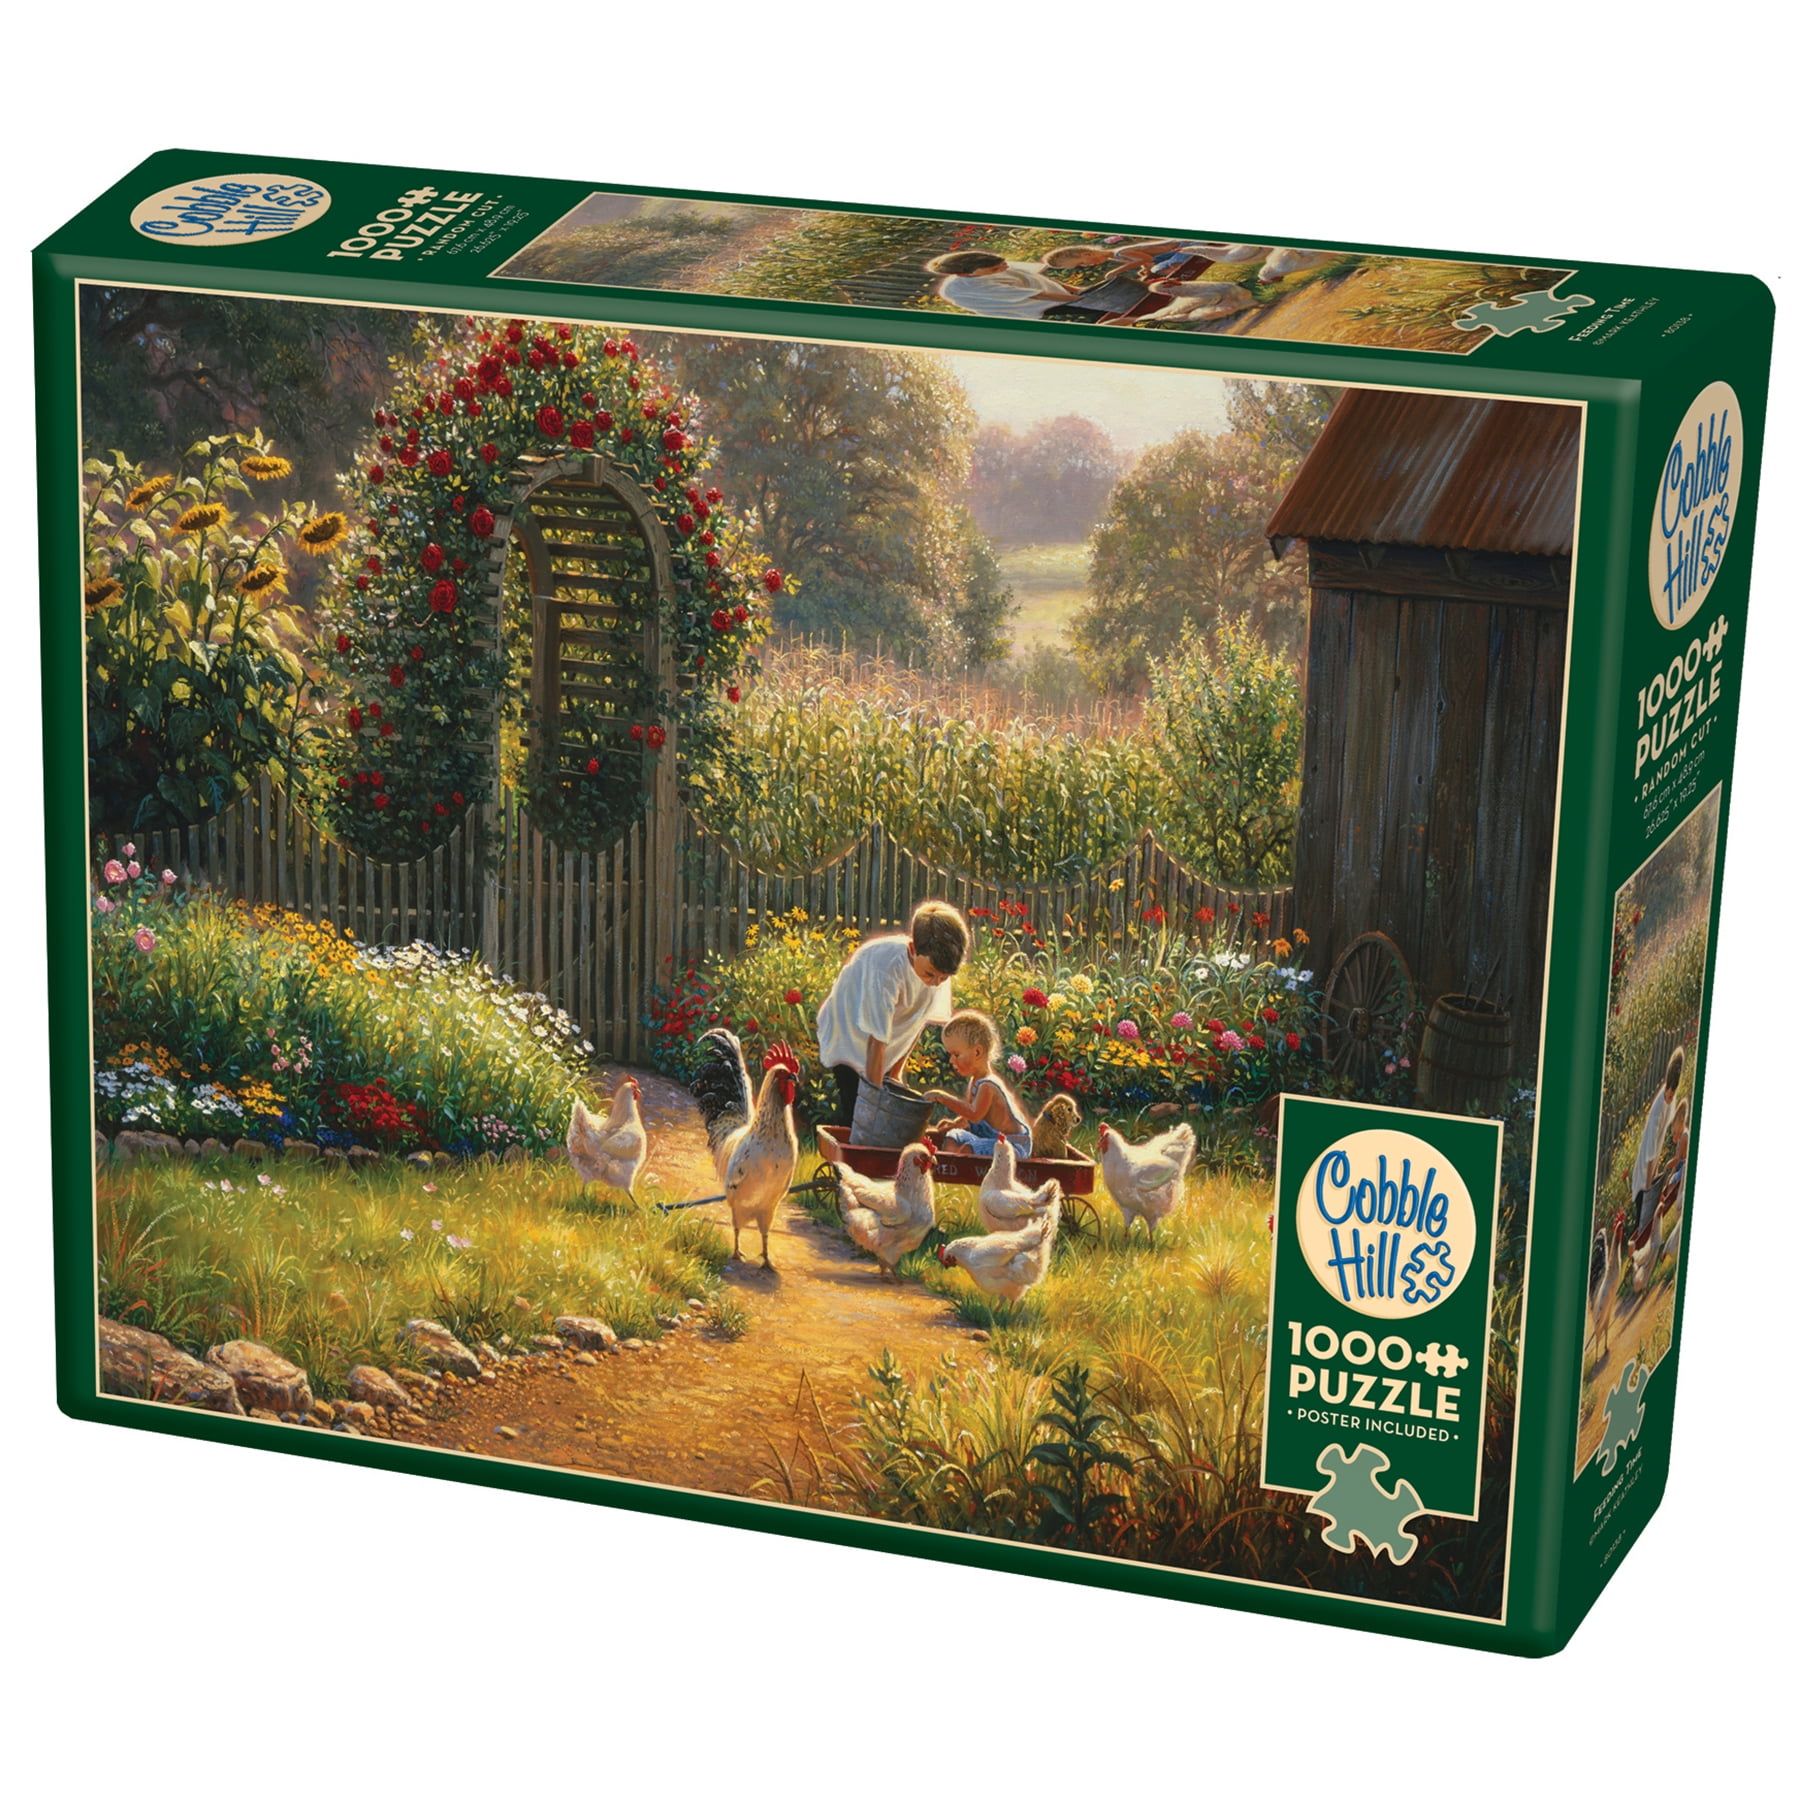 Cobble Hill 1,000 piece puzzle - Feeding Time - reference poster included